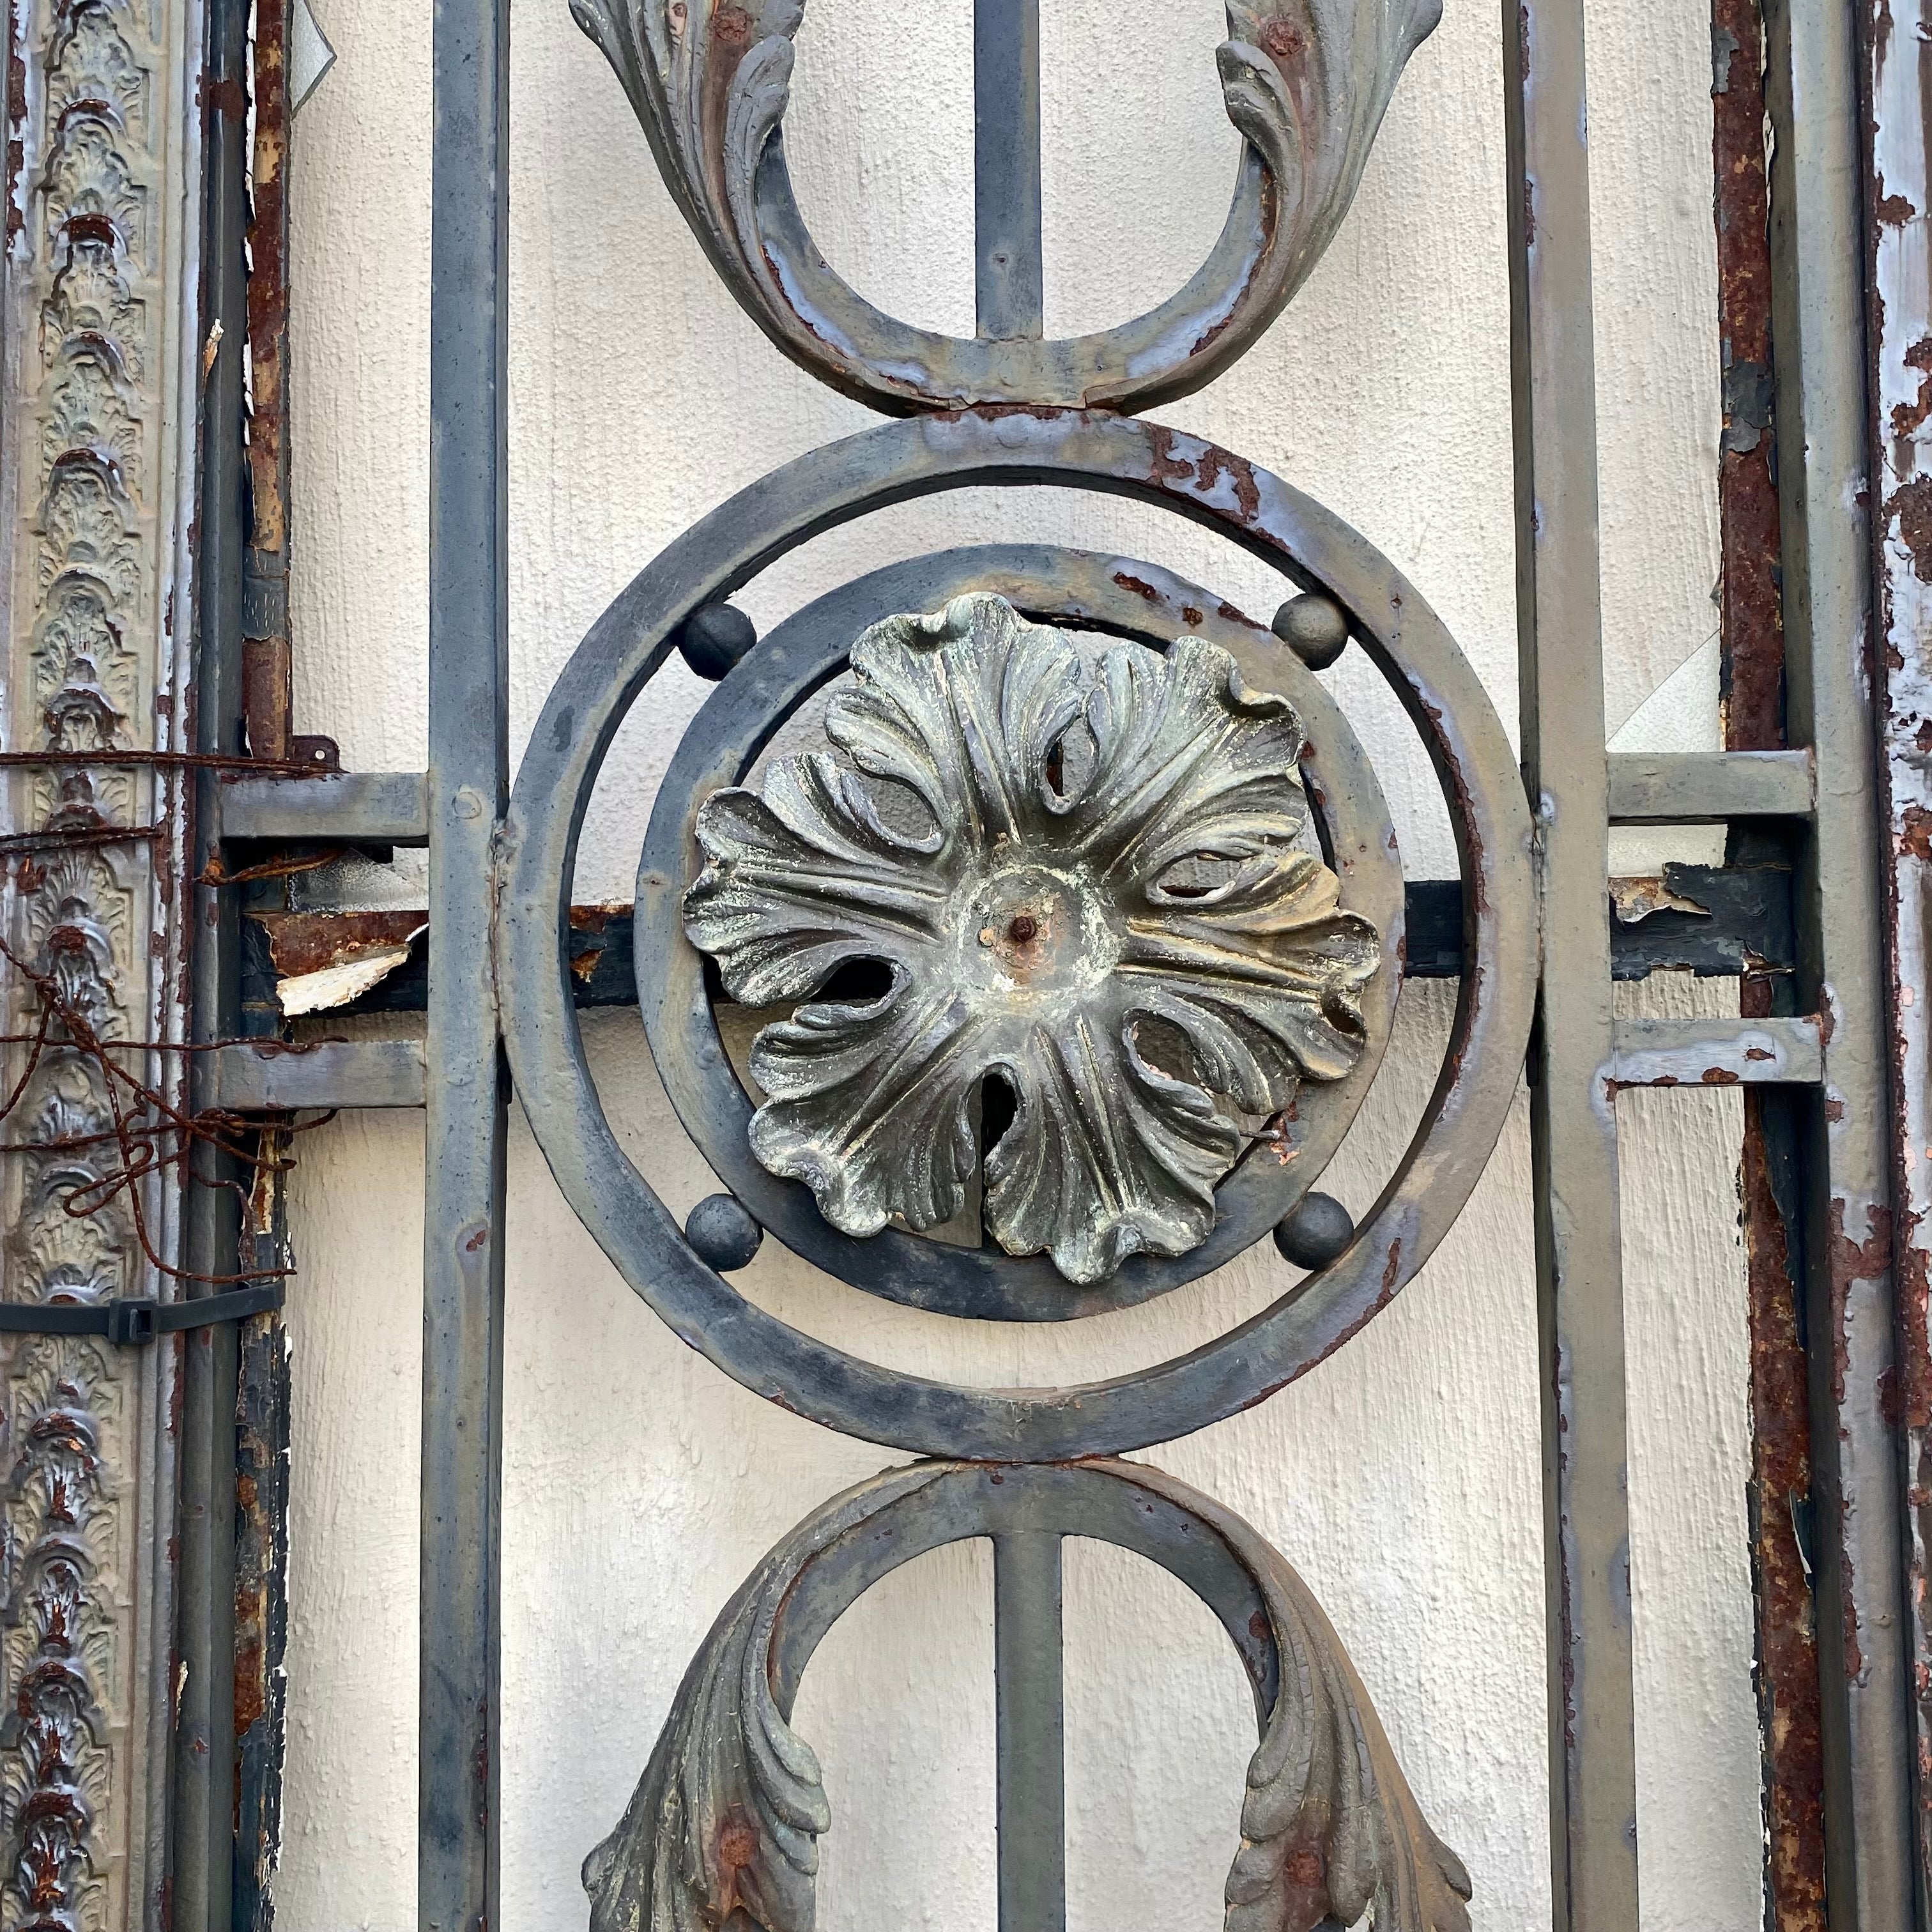 Beautiful Forged Steel Gate with Bronze Castings